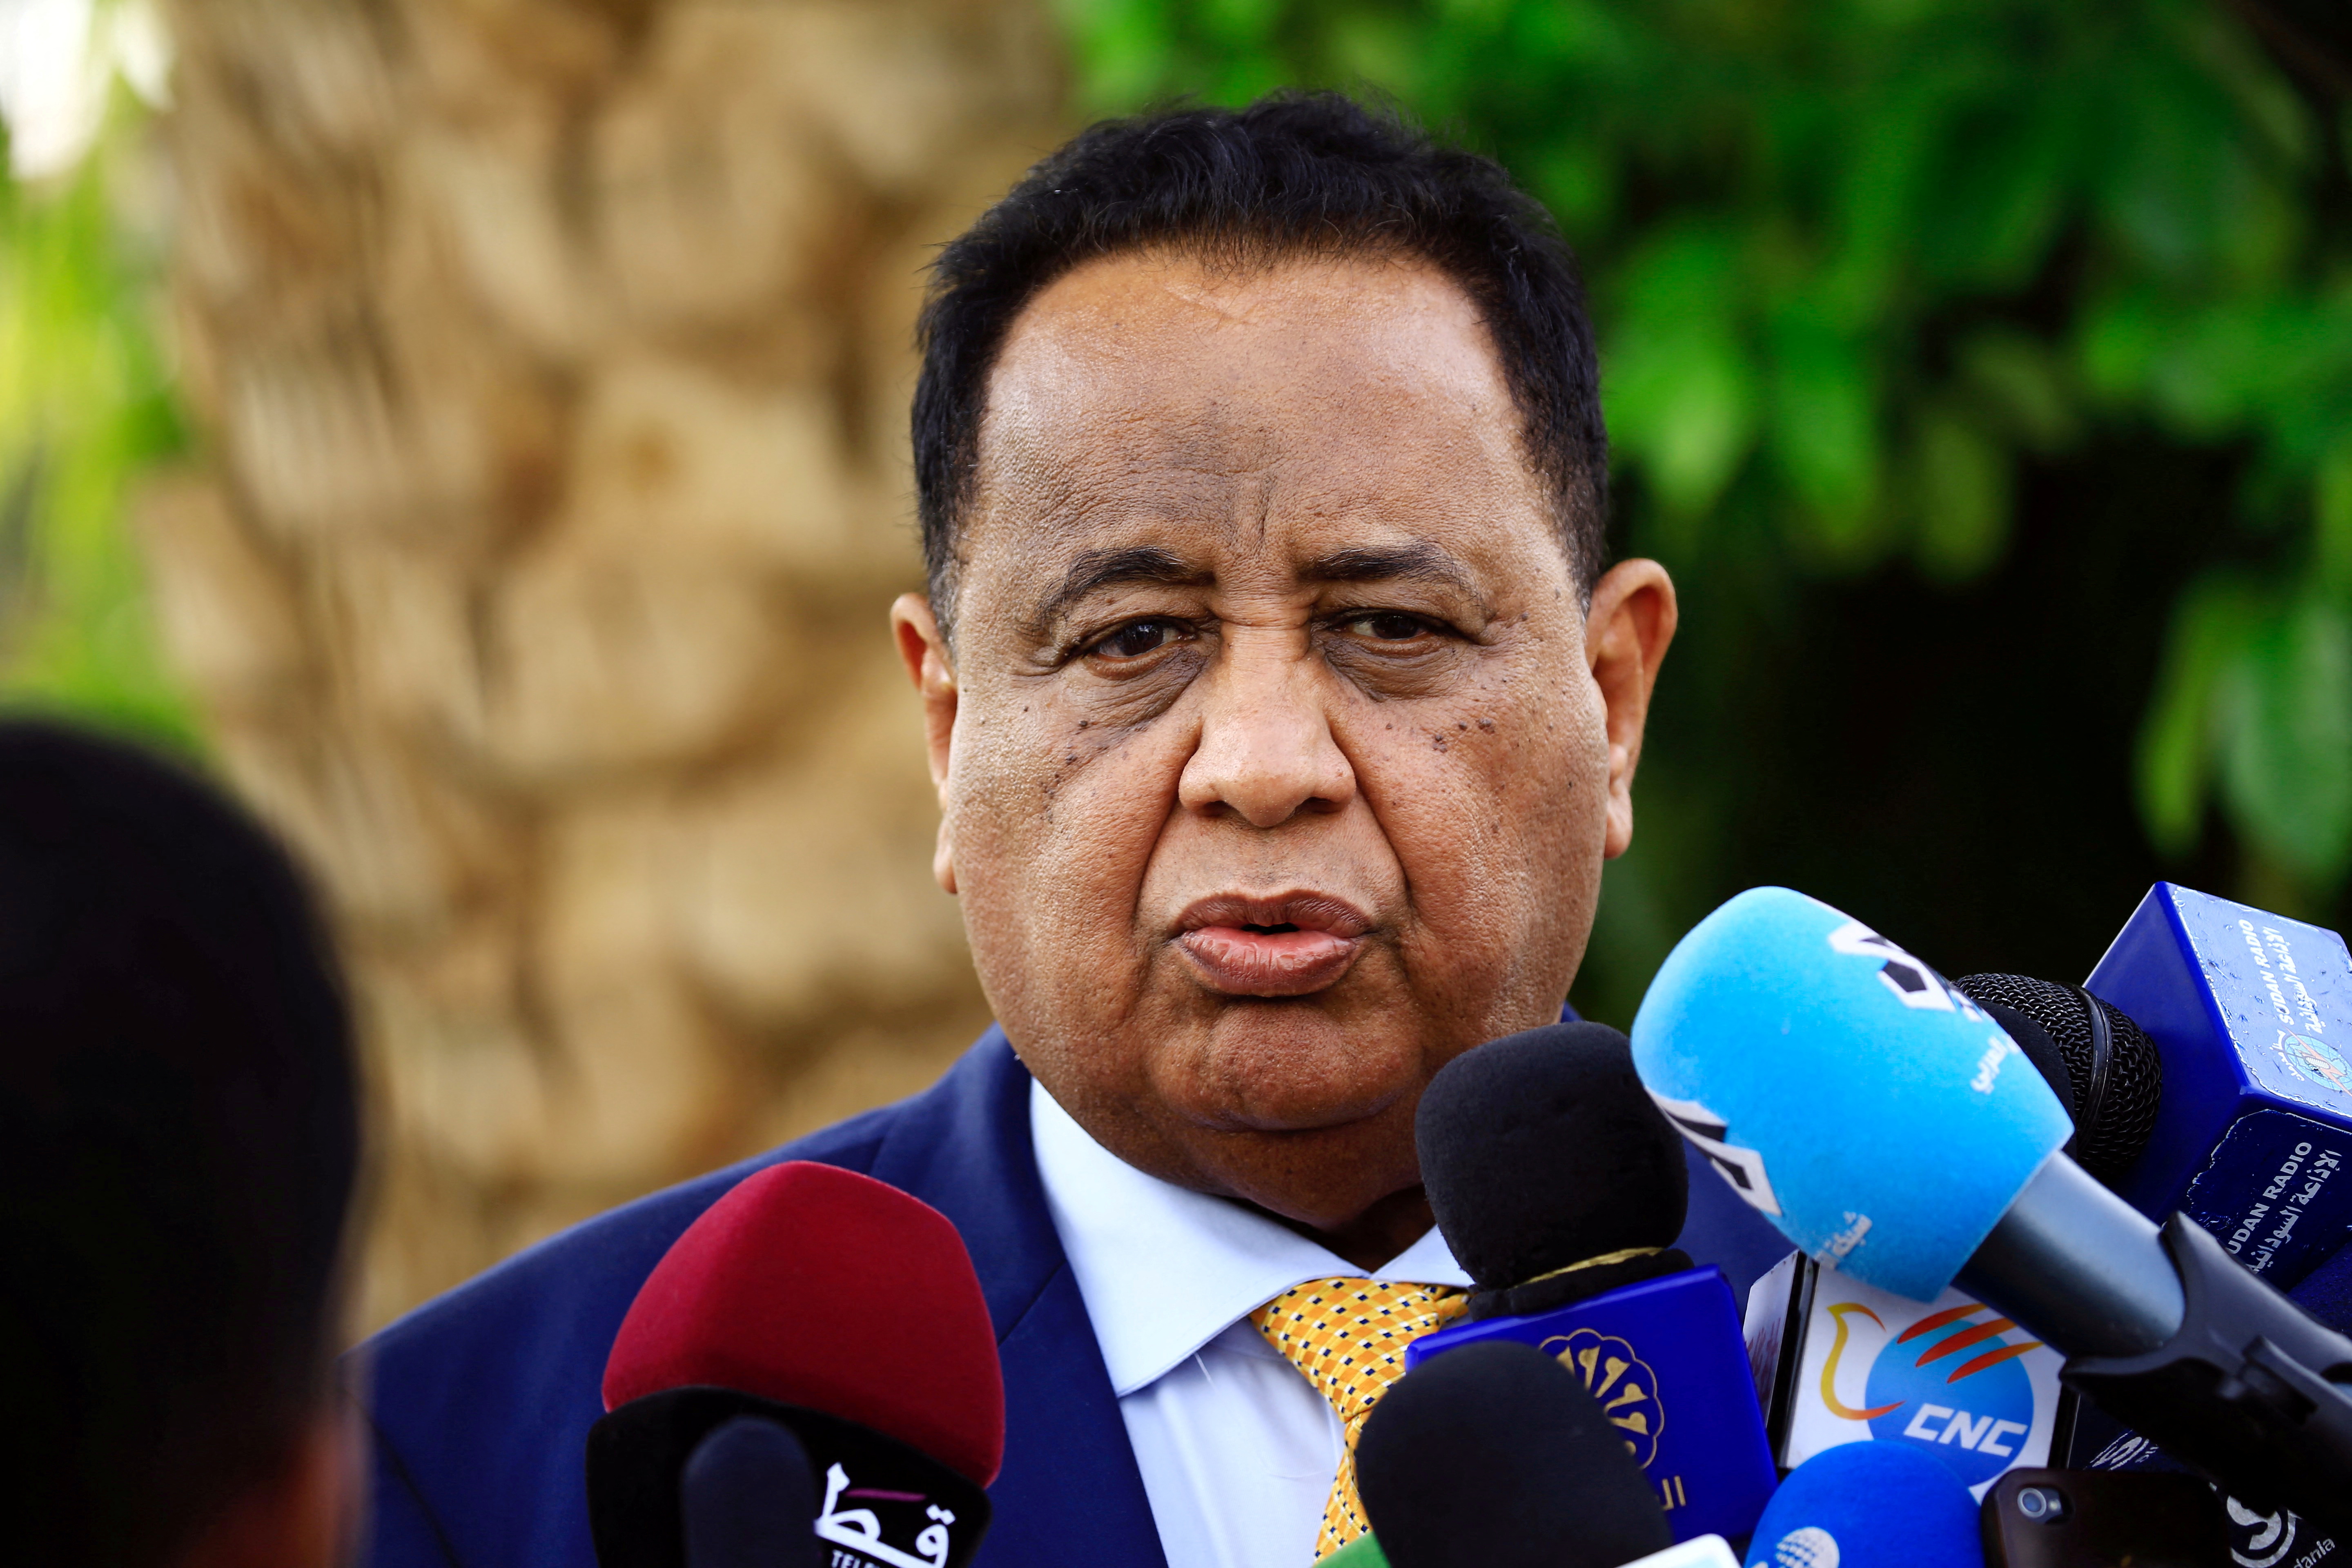 Sudan's Minister of Foreign Affairs Ibrahim Ahmed Abdelaziz Ghandour talks to the press during a joint news conference with Qatar's Minister of Foreign Affairs Mohammed bin Abdulrahman Al Thani in Khartoum